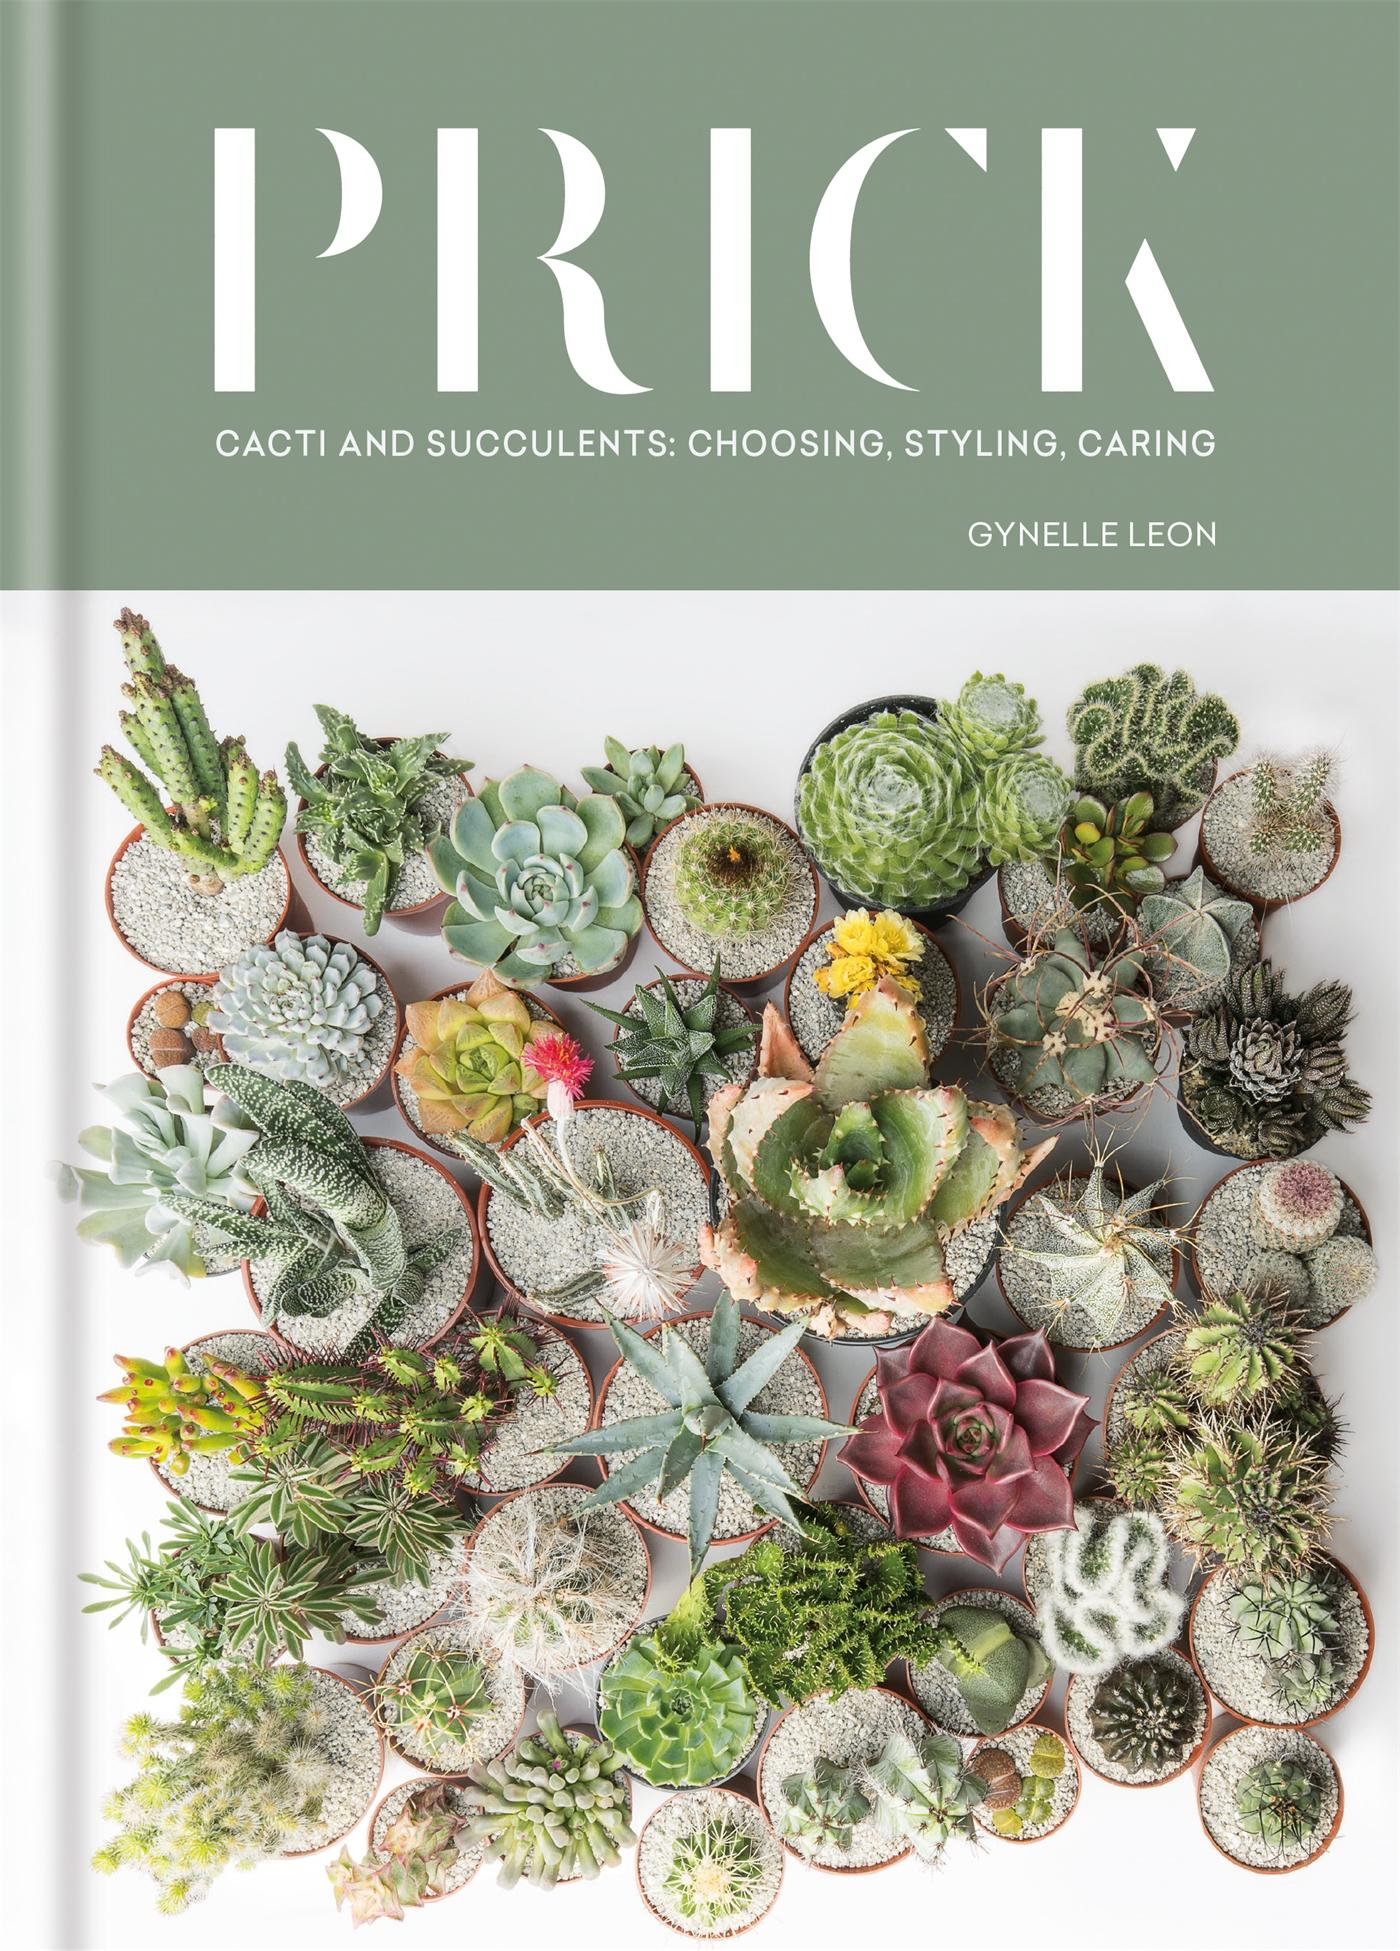 Prick | Cacti and Succulents: Choosing, Styling, Caring | Gynelle Leon | Buch | Gebunden | Englisch | 2017 | Octopus Publishing Group | EAN 9781784723675 - Leon, Gynelle